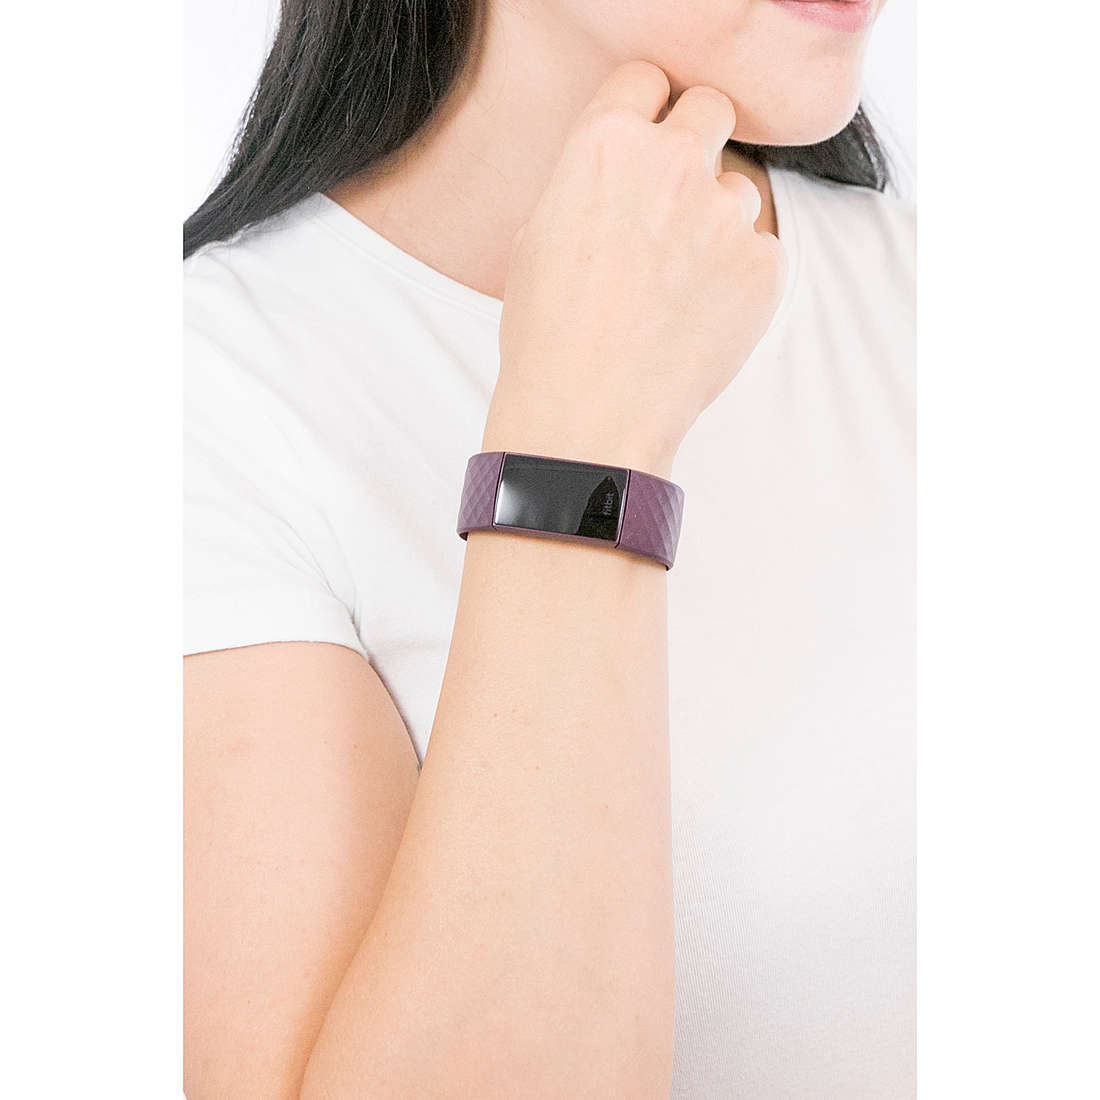 Fitbit digitals Charge woman FB417BYBY wearing